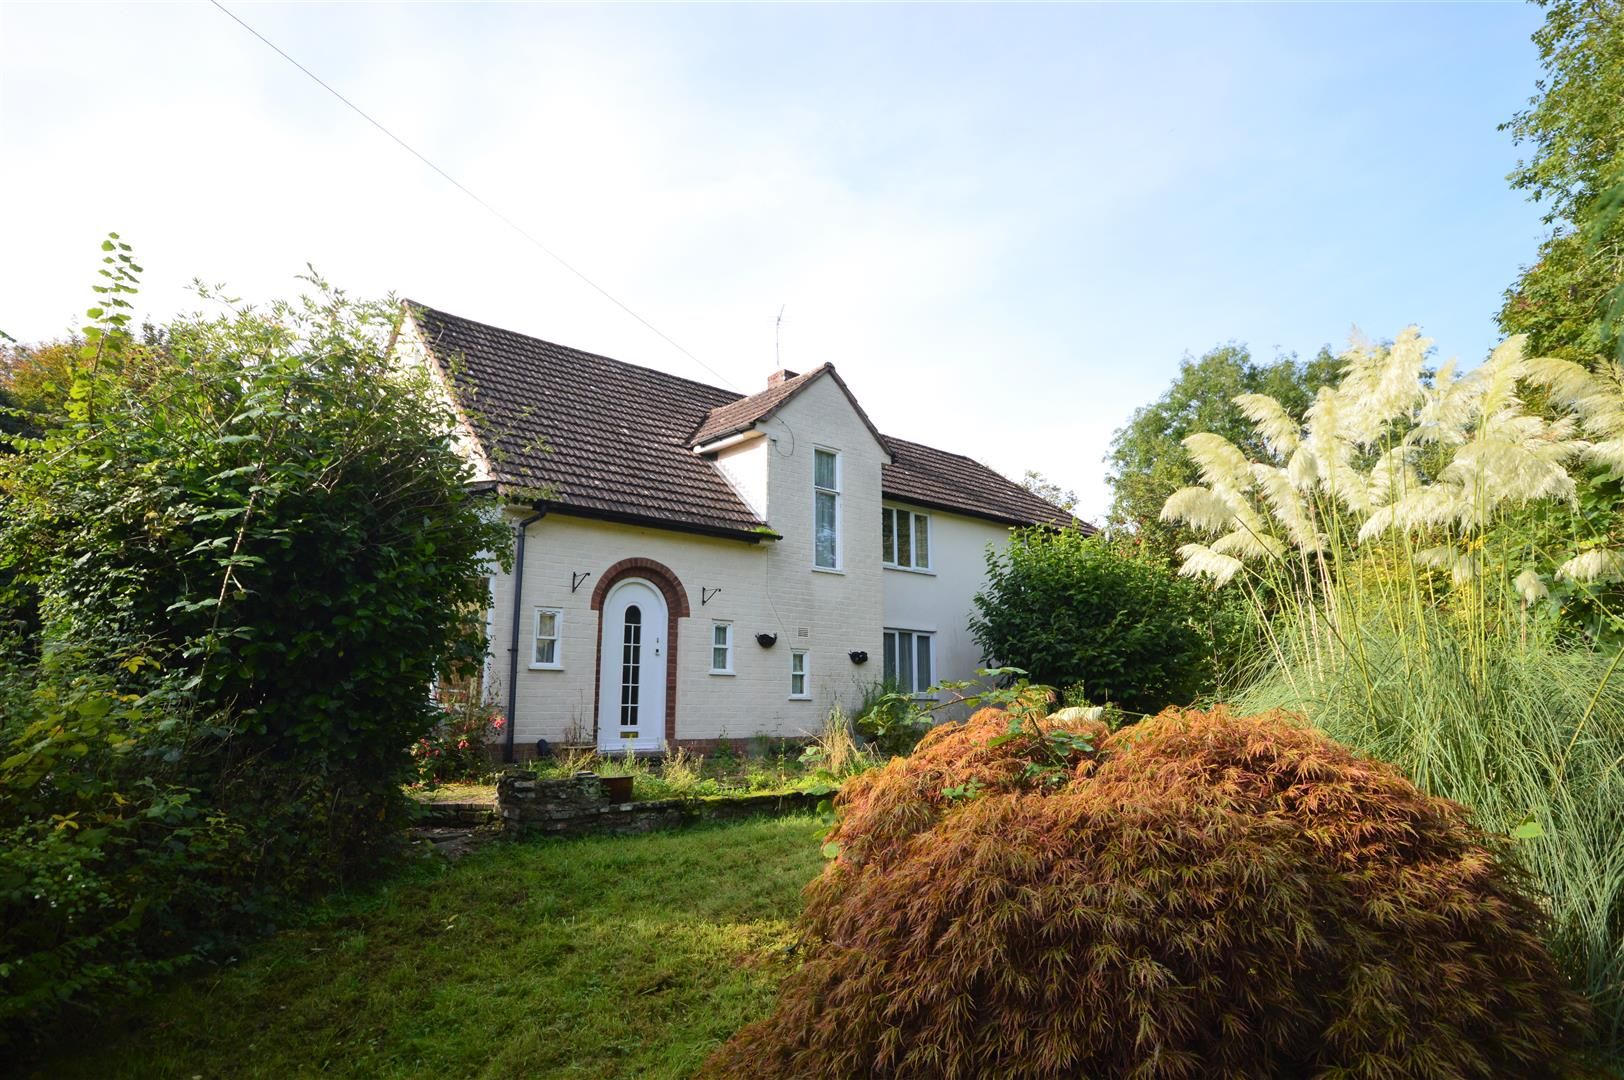 4 bed detached for sale in Weobley, HR4